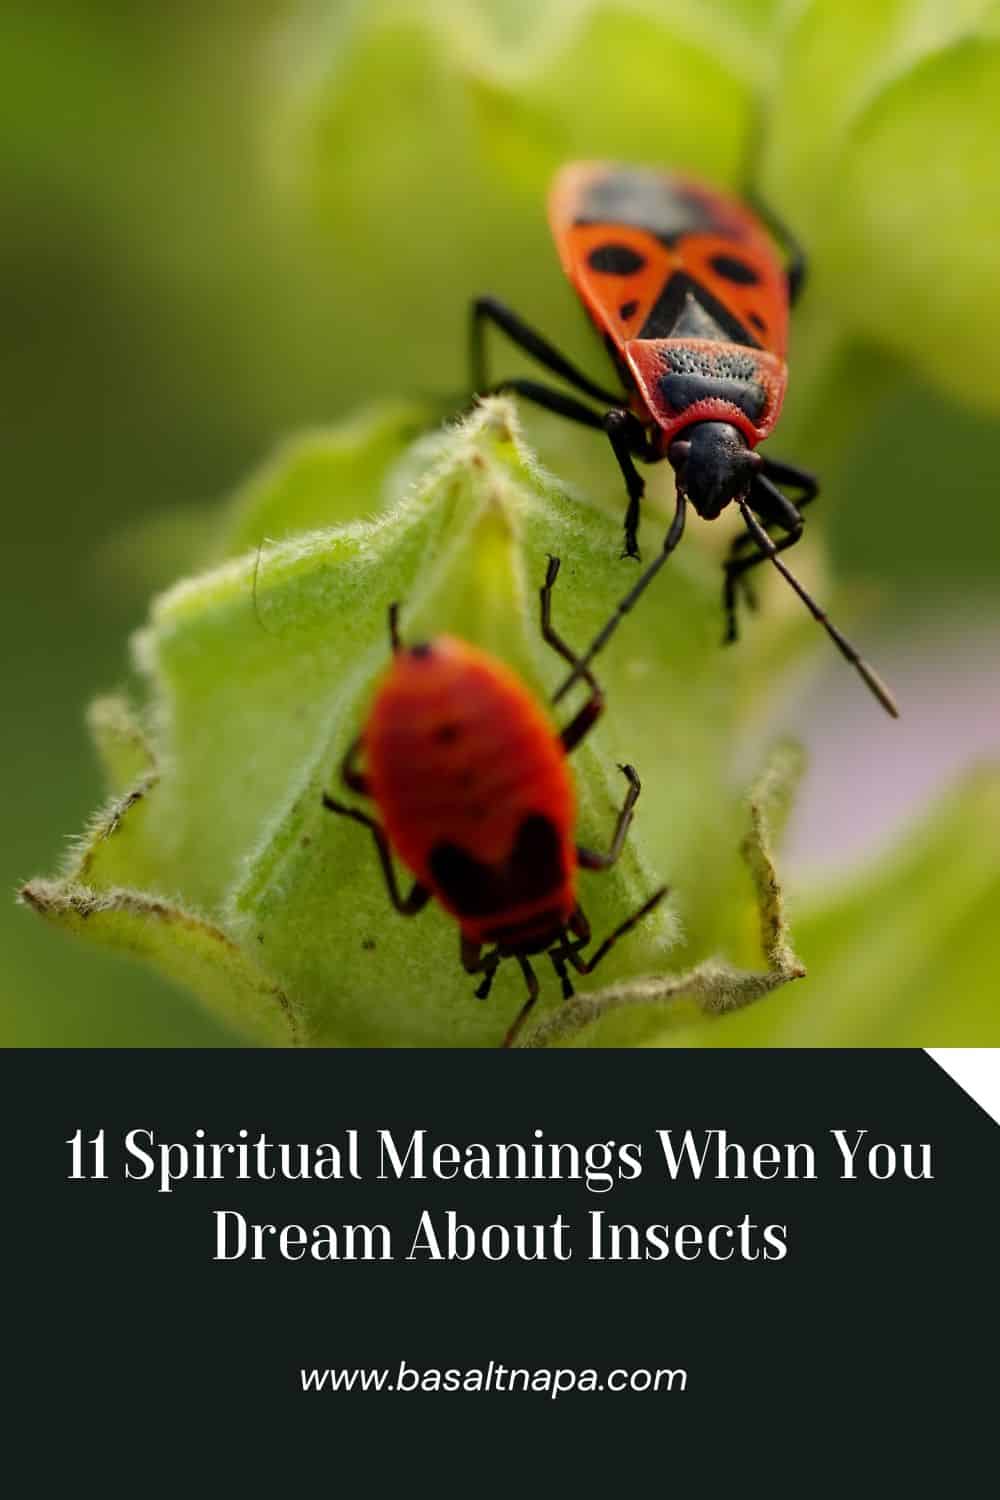 11 Spiritual Meanings When You Dream About Insects